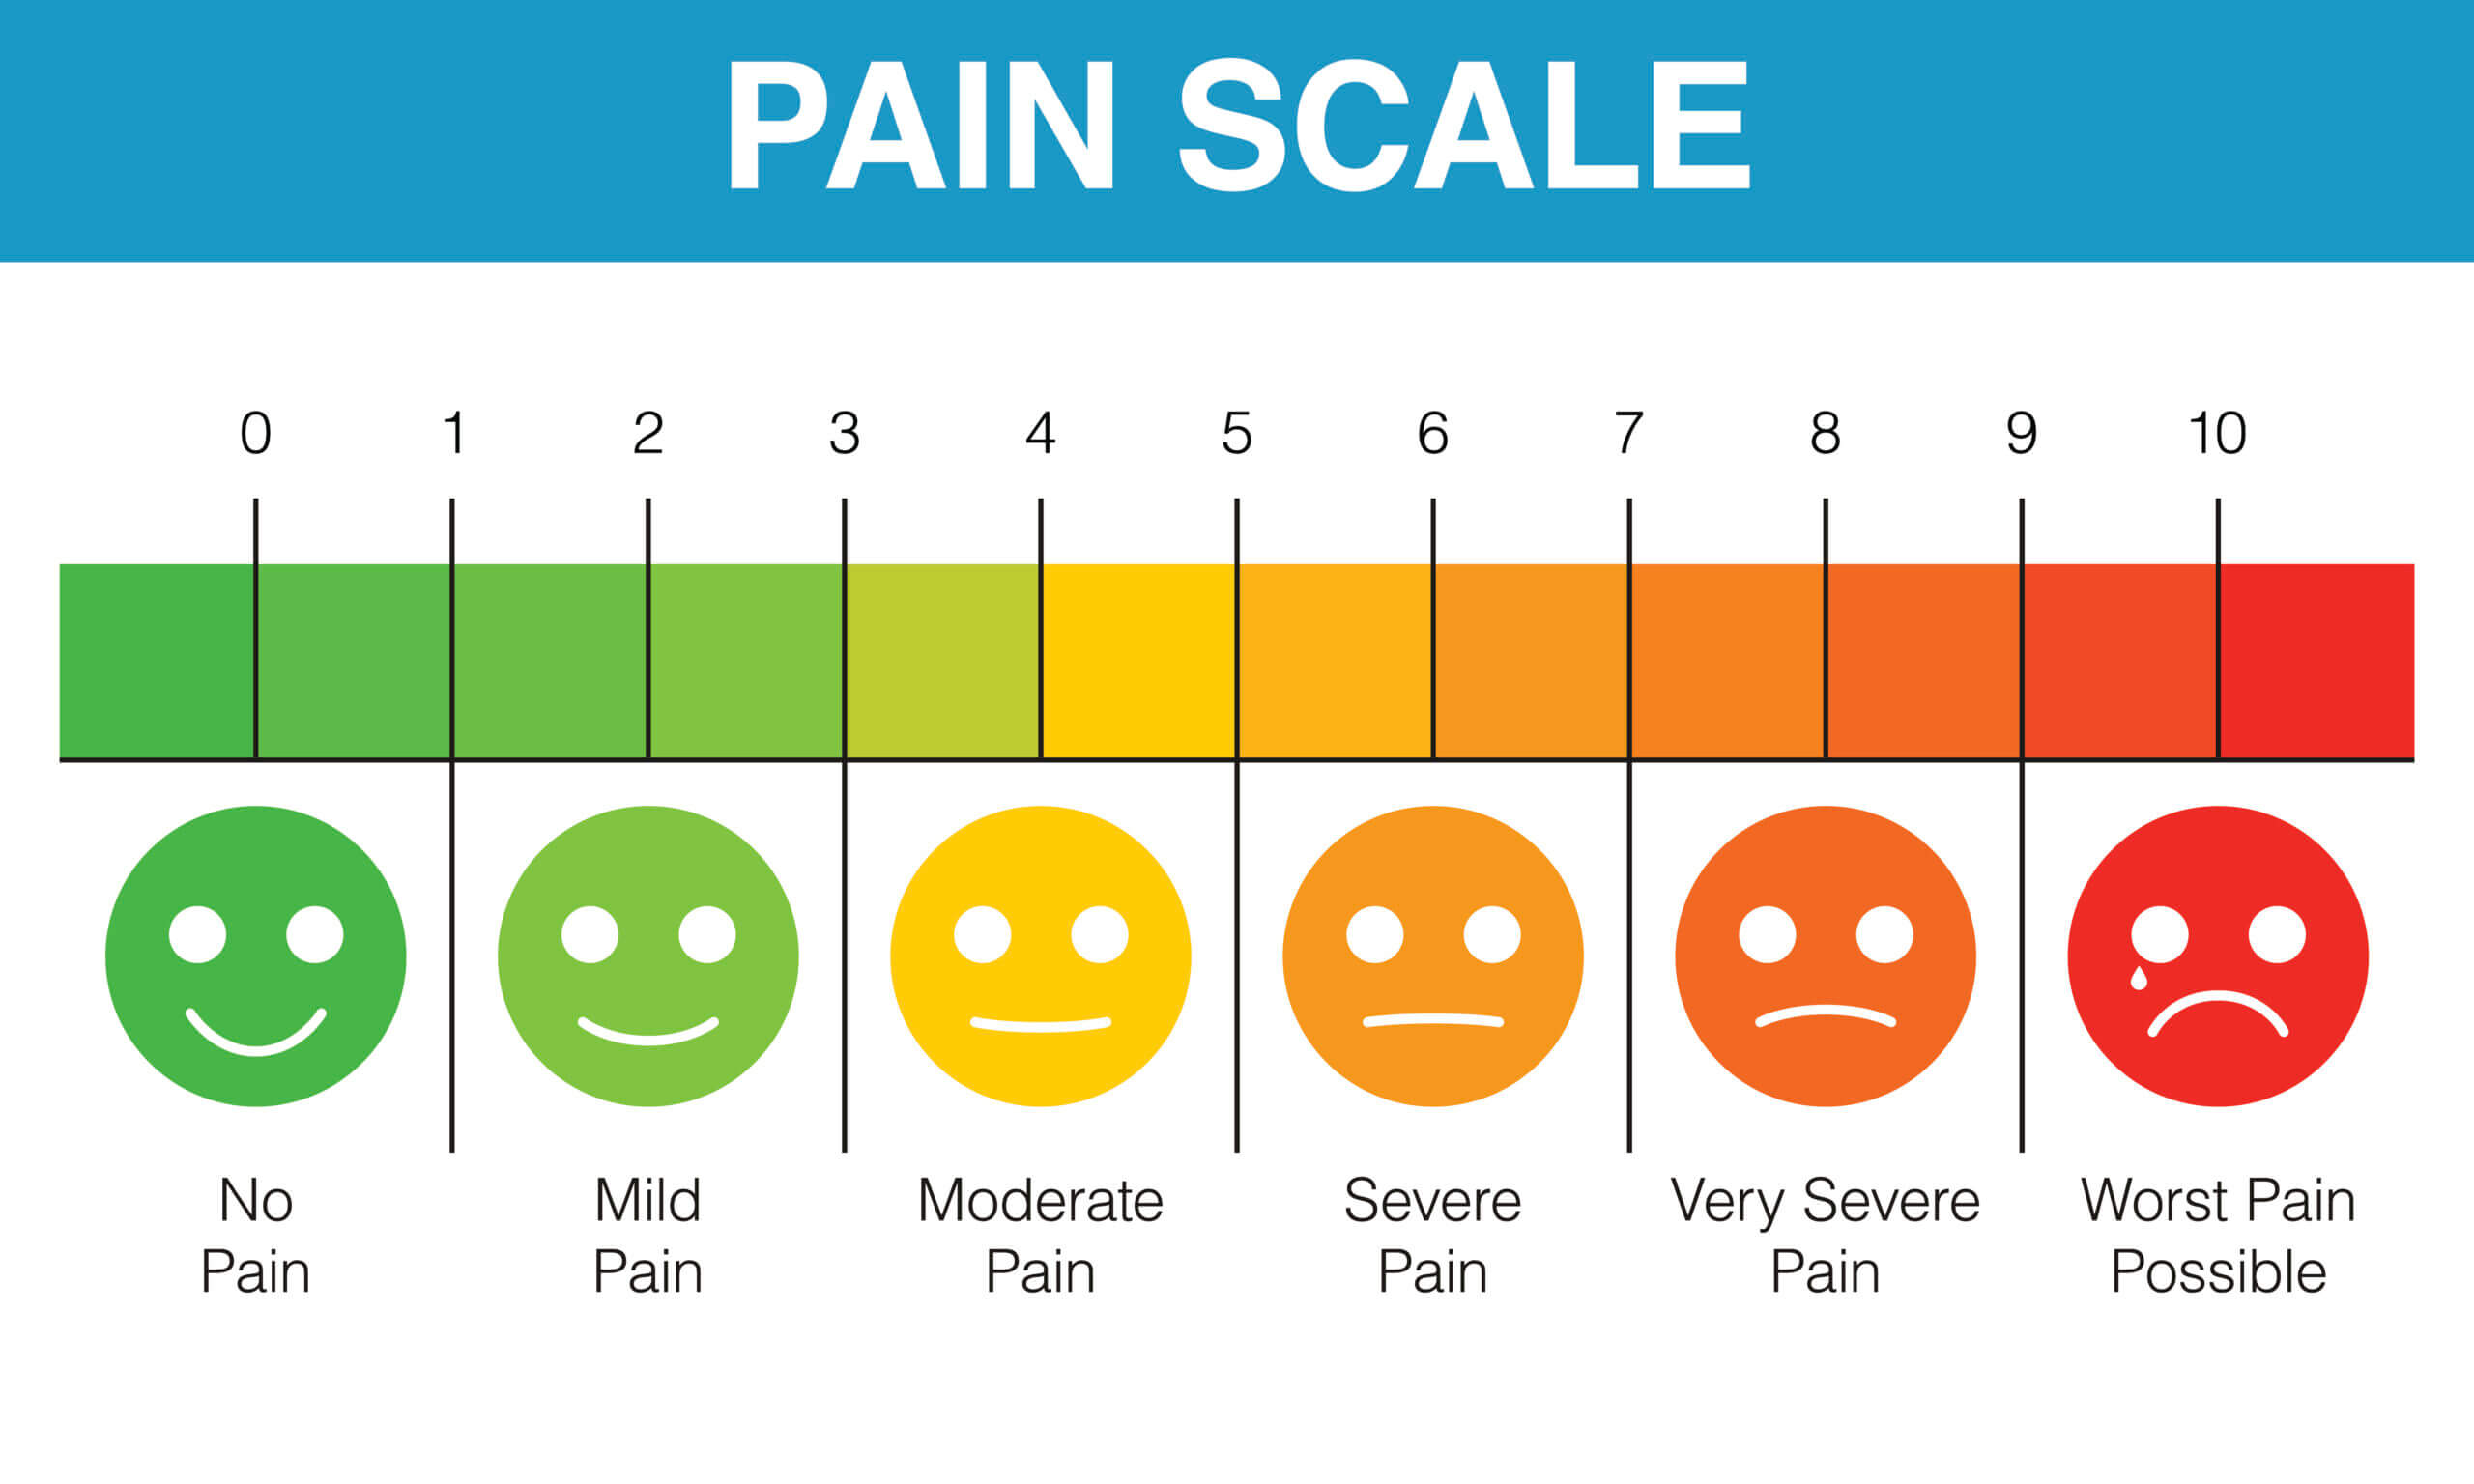 Anchoring the Pain Scale — Can It Be Done?